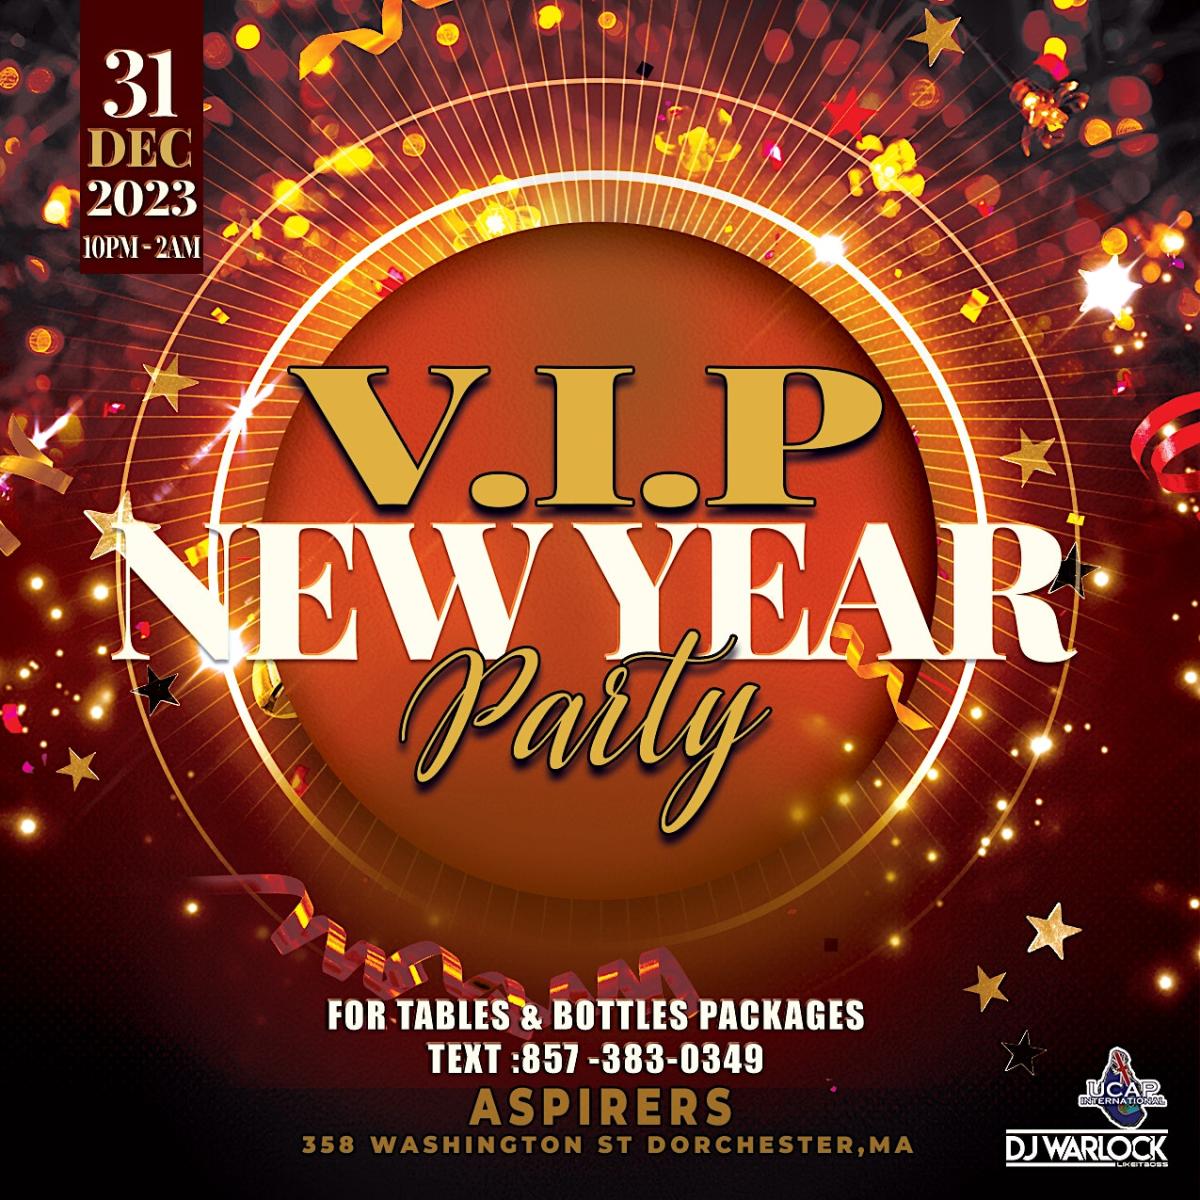 VIP New Year's Party flyer or graphic.